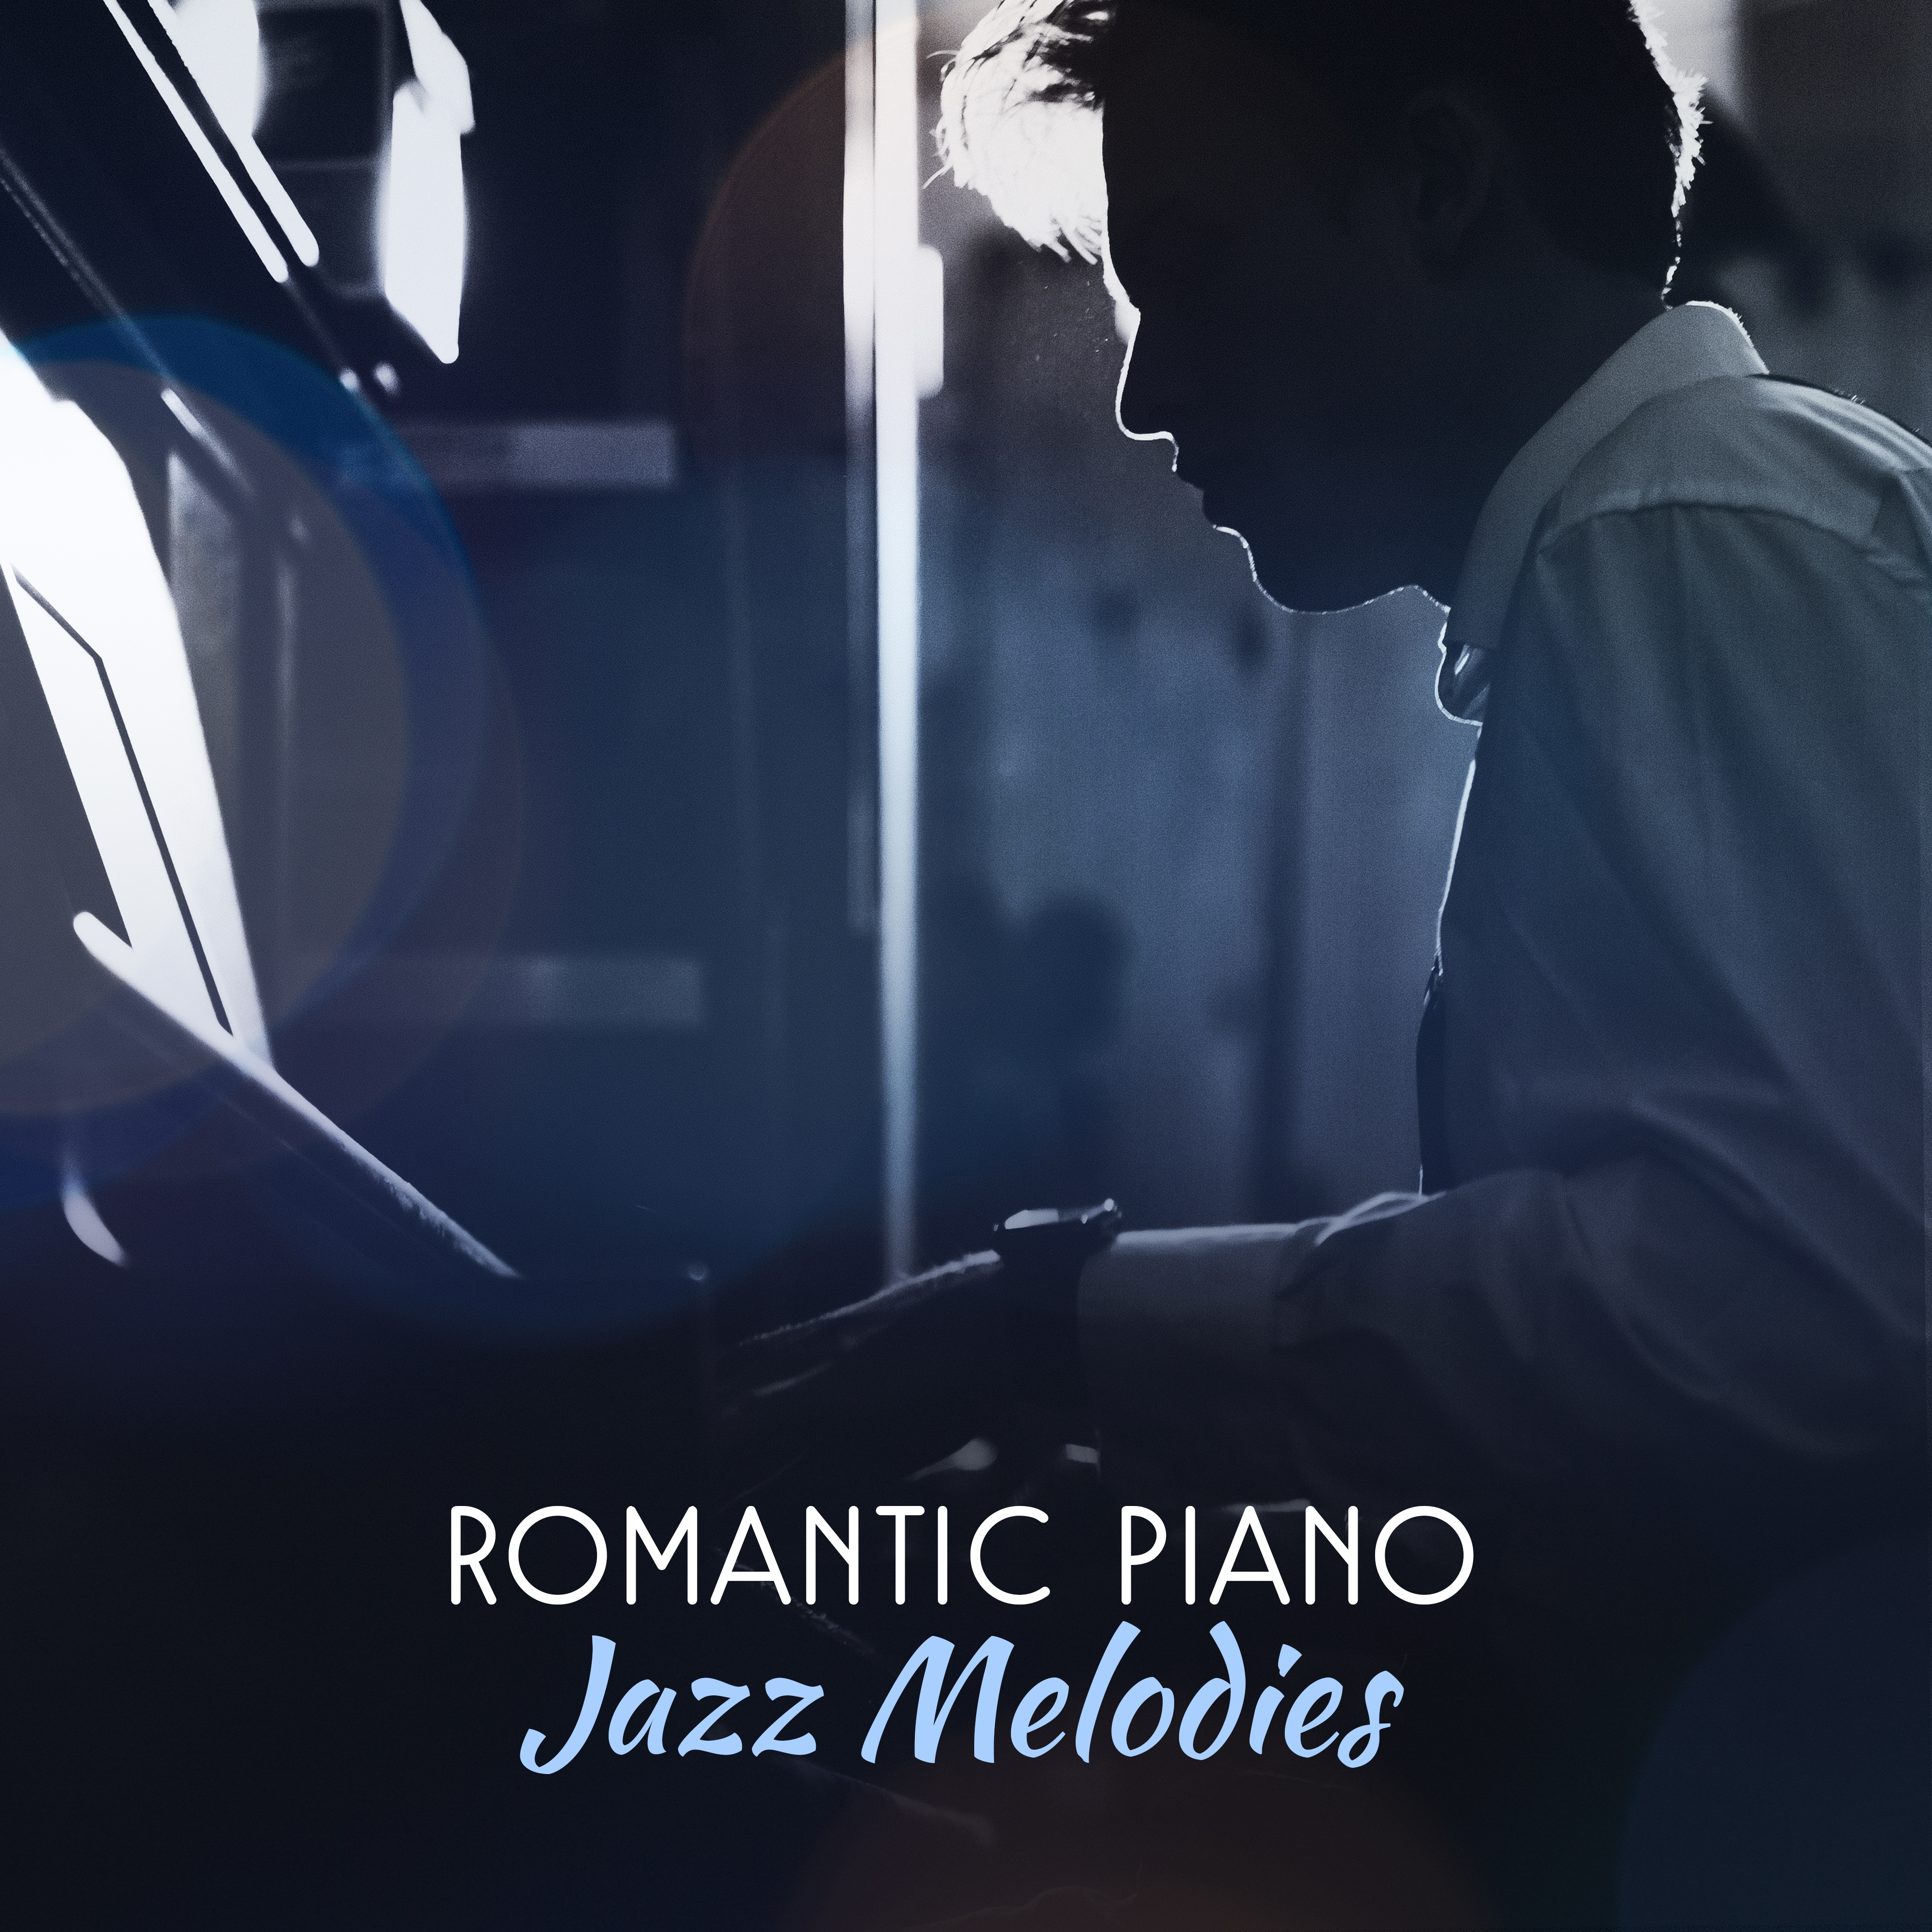 Romantic Piano Jazz Melodies  Smooth Sounds to Relax, Easy Listening, Erotic Evening with Jazz Music